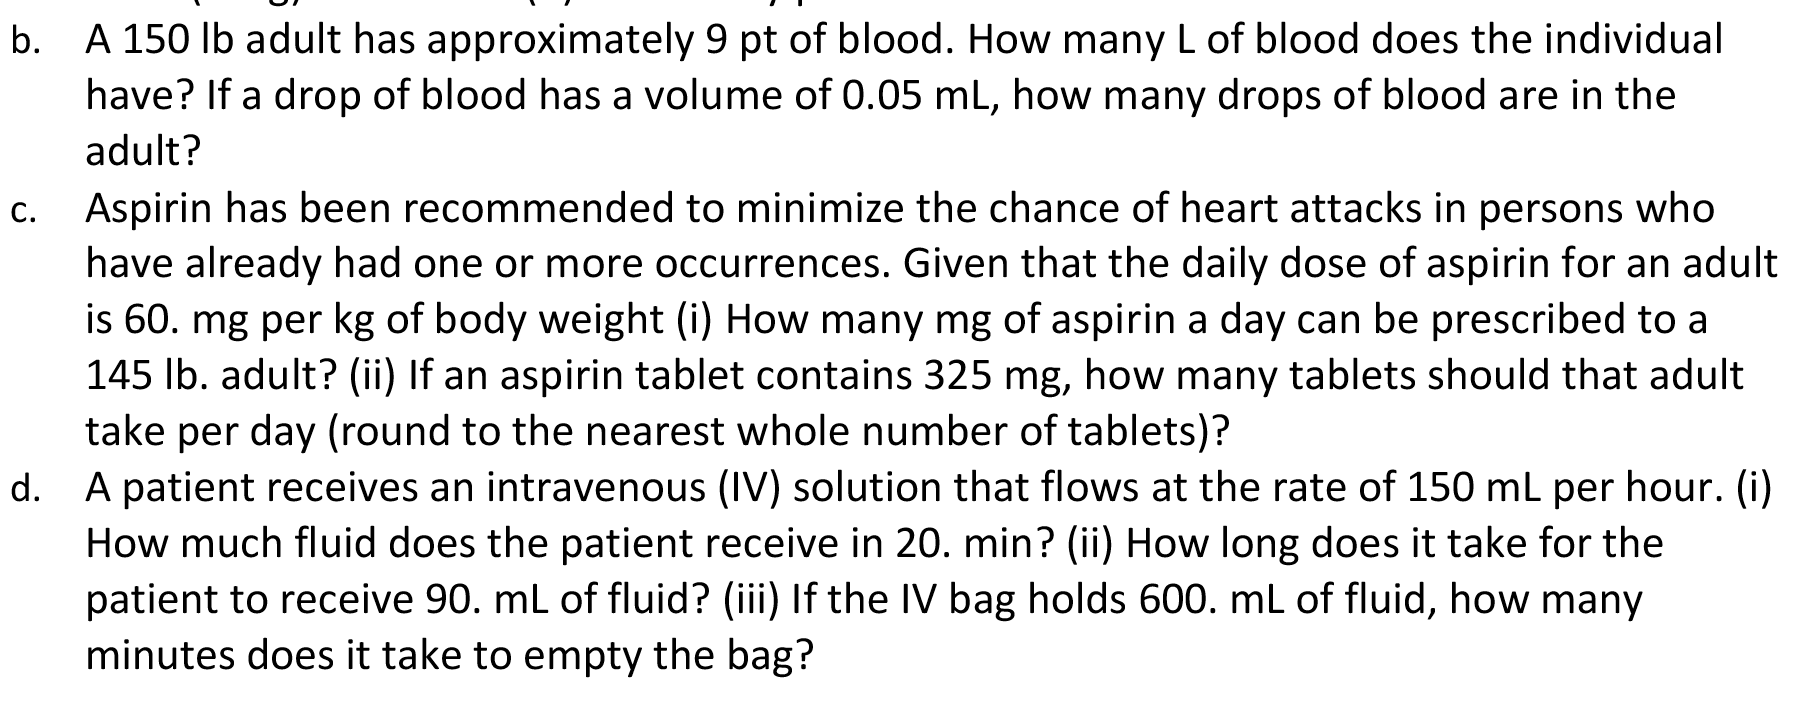 A 150 lb adult has approximately 9 pt of blood. How many L of blood does the individual
have? If a drop of blood has a volume of 0.05 mL, how many drops of blood are in the
b.
adult?
Aspirin has been recommended to minimize the chance of heart attacks in persons who
have already had one or more occurrences. Given that the daily dose of aspirin for an adult
is 60. mg per kg of body weight (i) How many mg of aspirin a day can be prescribed to a
145 Ib. adult? (ii) If an aspirin tablet contains 325 mg, how many tablets should that adult
C.
take per day (round to the nearest whole number of tablets)?
A patient receives an intravenous (IV) solution that flows at the rate of 150 mL per hour. (i)
How much fluid does the patient receive in 20. min? (ii) How long does it take for the
patient to receive 90. ml of fluid? (iii) If the IV bag holds 600. mL of fluid, how many
minutes does it take to empty the bag?
d.
